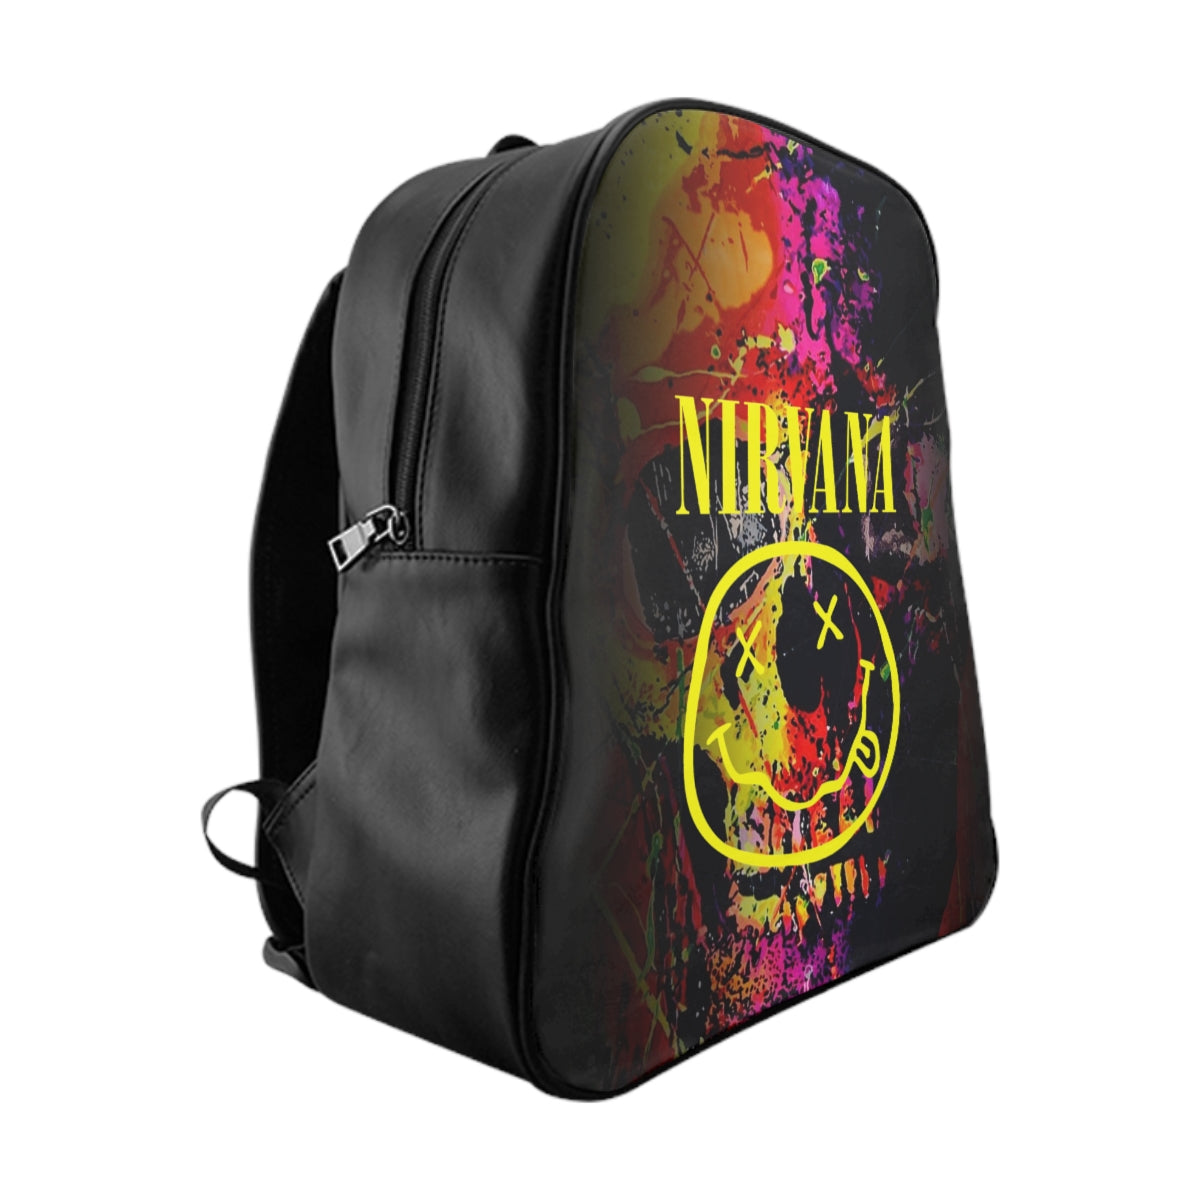 Getrott Nirvana Graffiti Backpack Padded Syntetic Leather Carry-On Travel Check Luggage 4-Wheel Spinner Suitcase Bag Multiple Colors and Sizes